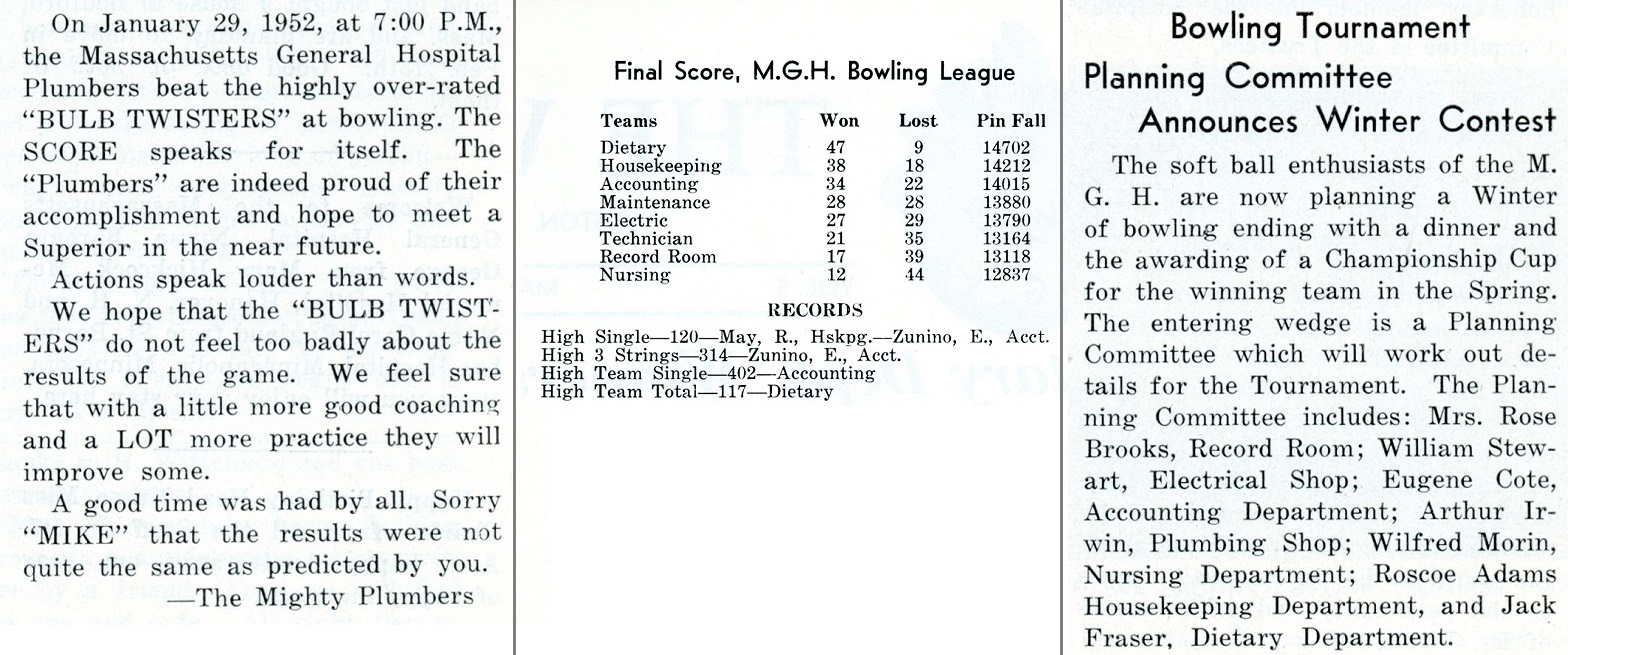 Archival documents from the history of the MGH Bowling League